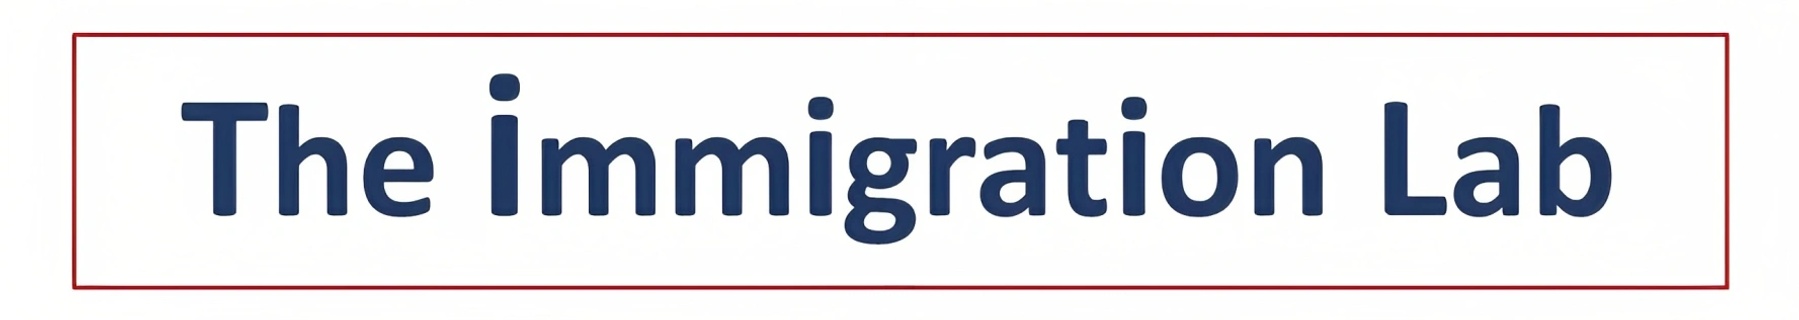 The Immigration Lab